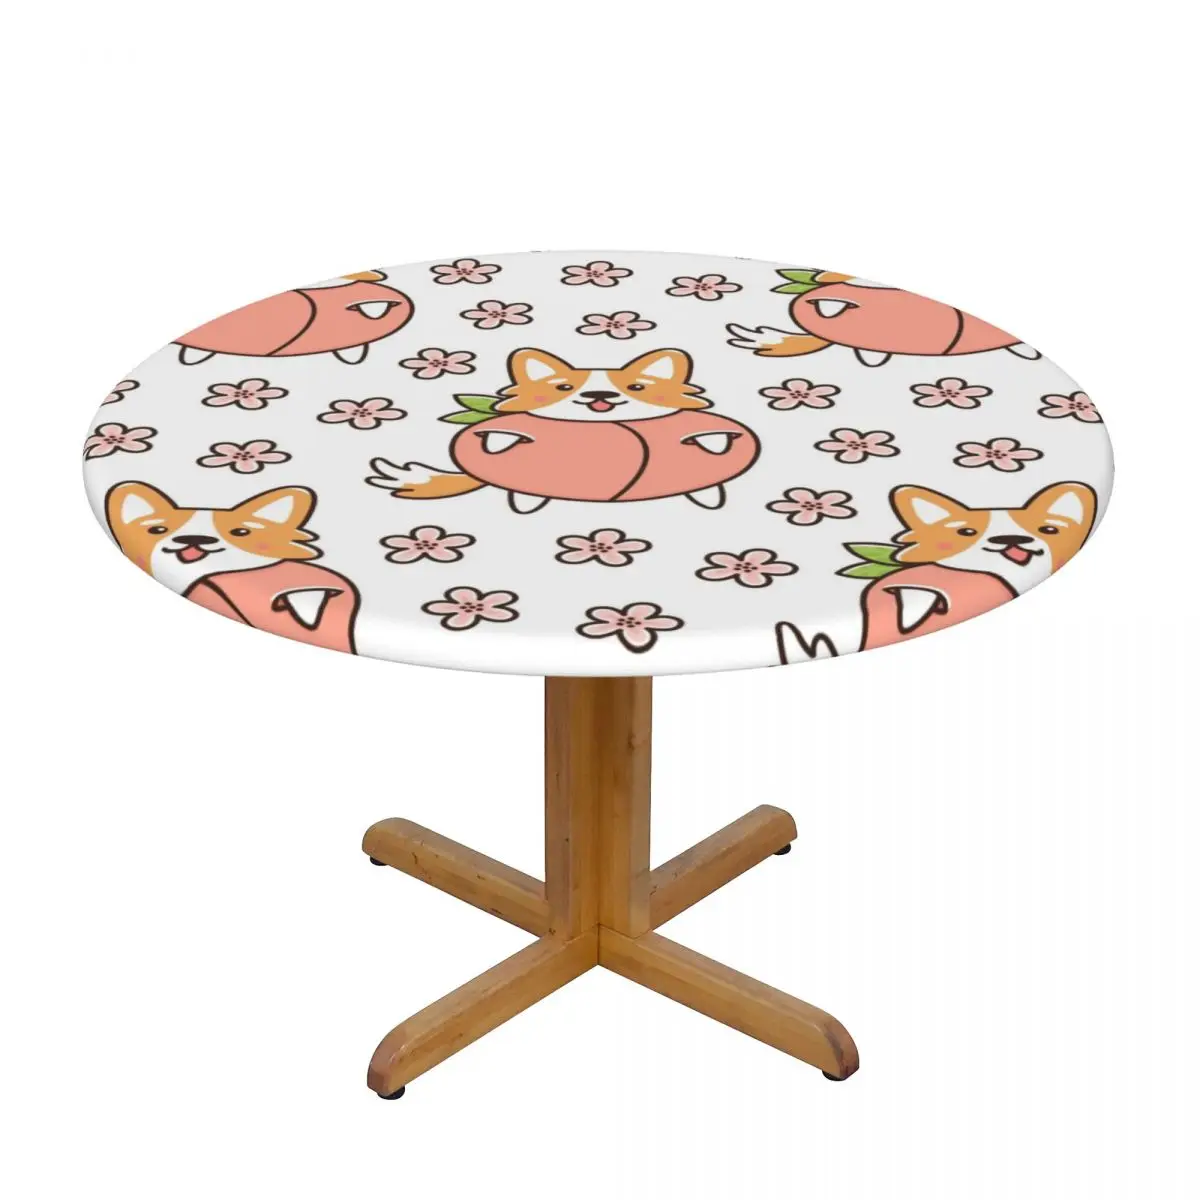 

Fitted Round Tablecloth Protector Soft Table Cover Dog Welsh Corgi In Peach With Flowers Anti-Scald Plate Kitchen Tablemat